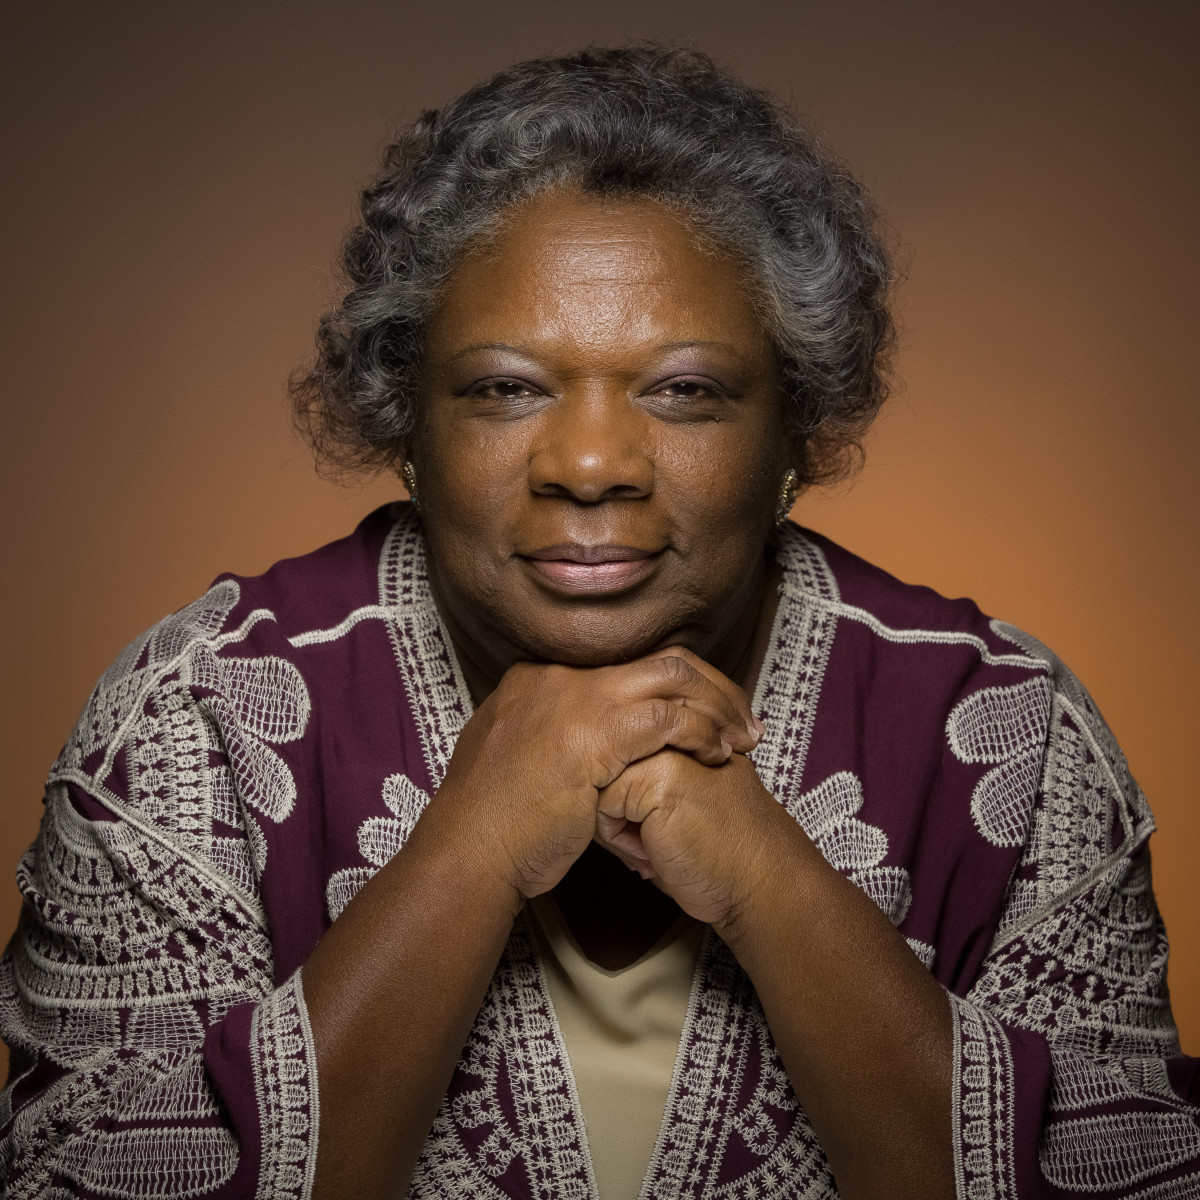 Leona Tate, 64, who helped to desegregate the Deep South when she was six years old.